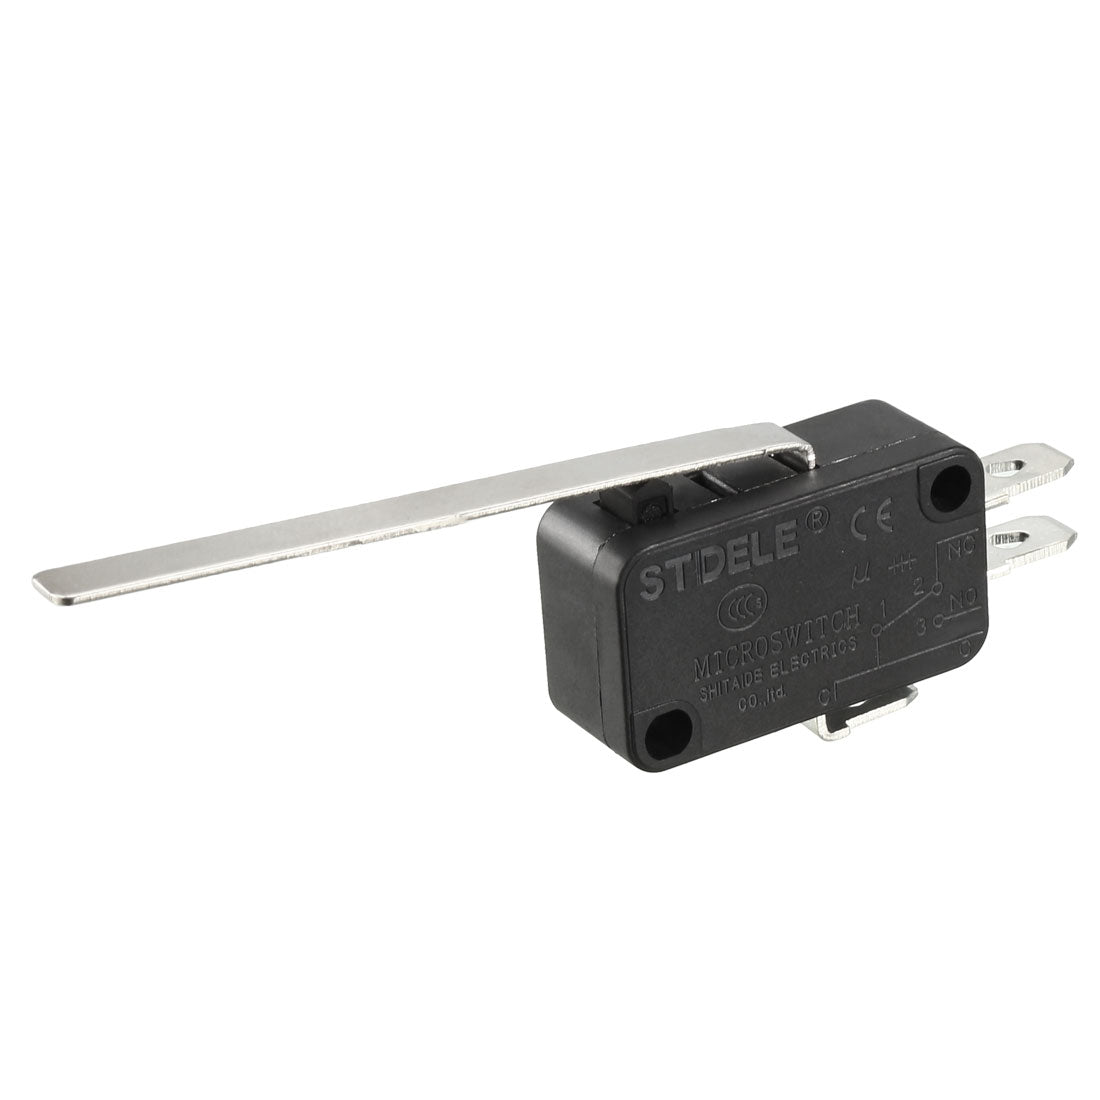 uxcell Uxcell 15A 250VAC Black V-153-1C25 Long Straight Lever Miniature Micro Switch